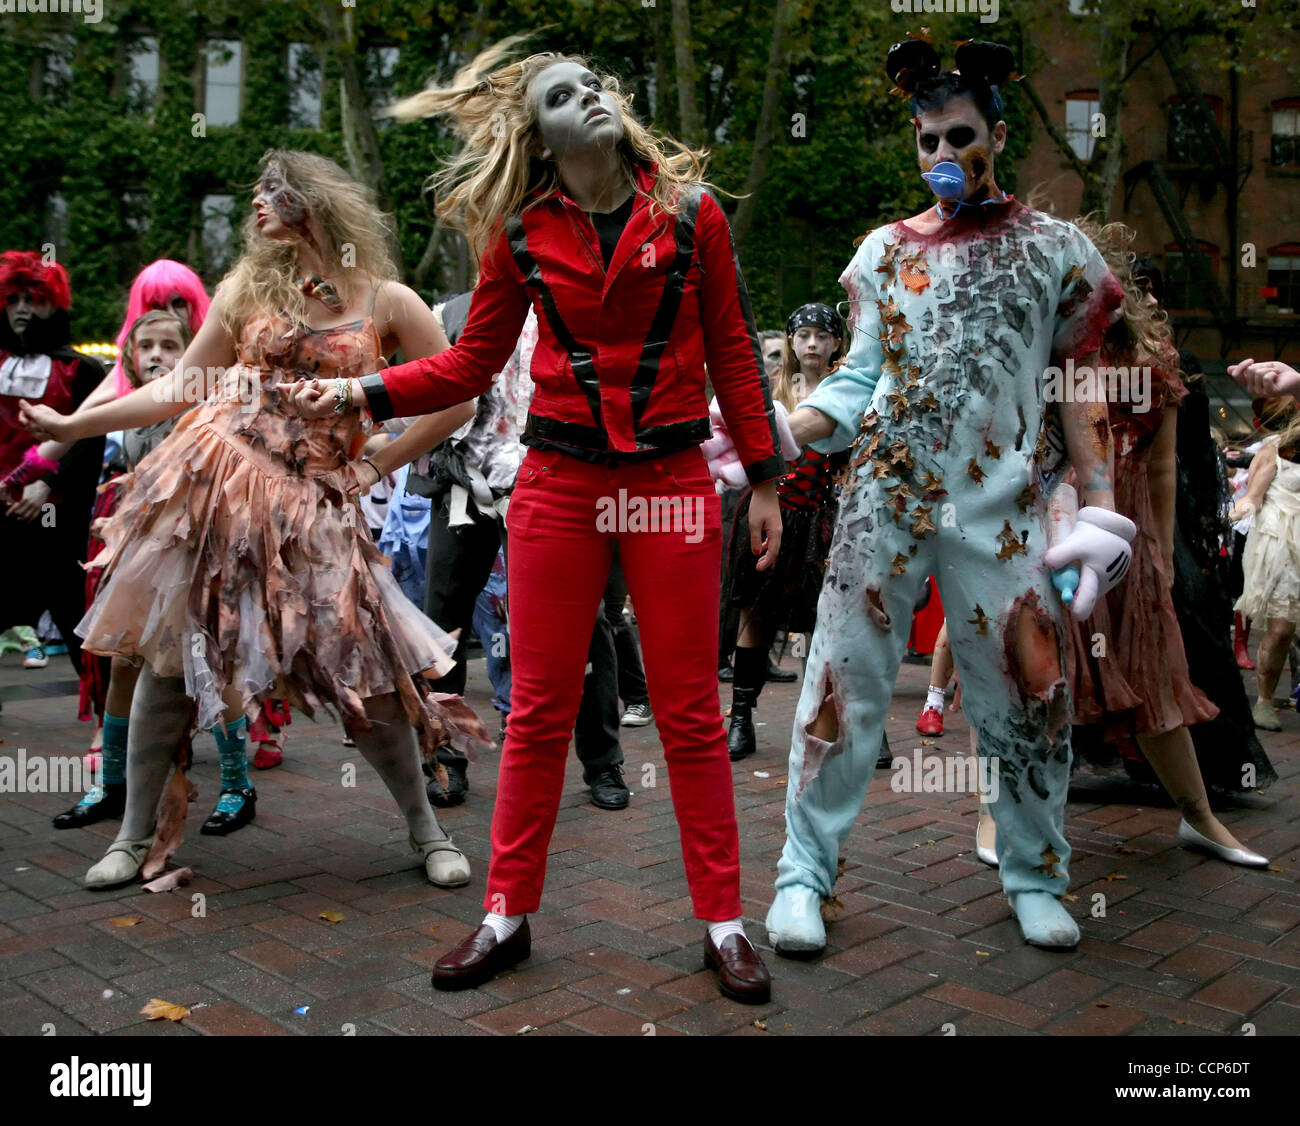 Oct. 23, 2010 - Seattle, Washington, USA - 278 people dressed as zombies to dance in Occidental Park to Michael Jackson's ''Thriller'' as part of the Thrill the World attempt to break the world record for largest simultaneous Thriller dance.  Groups in cities all over the world participated.   Decem Stock Photo